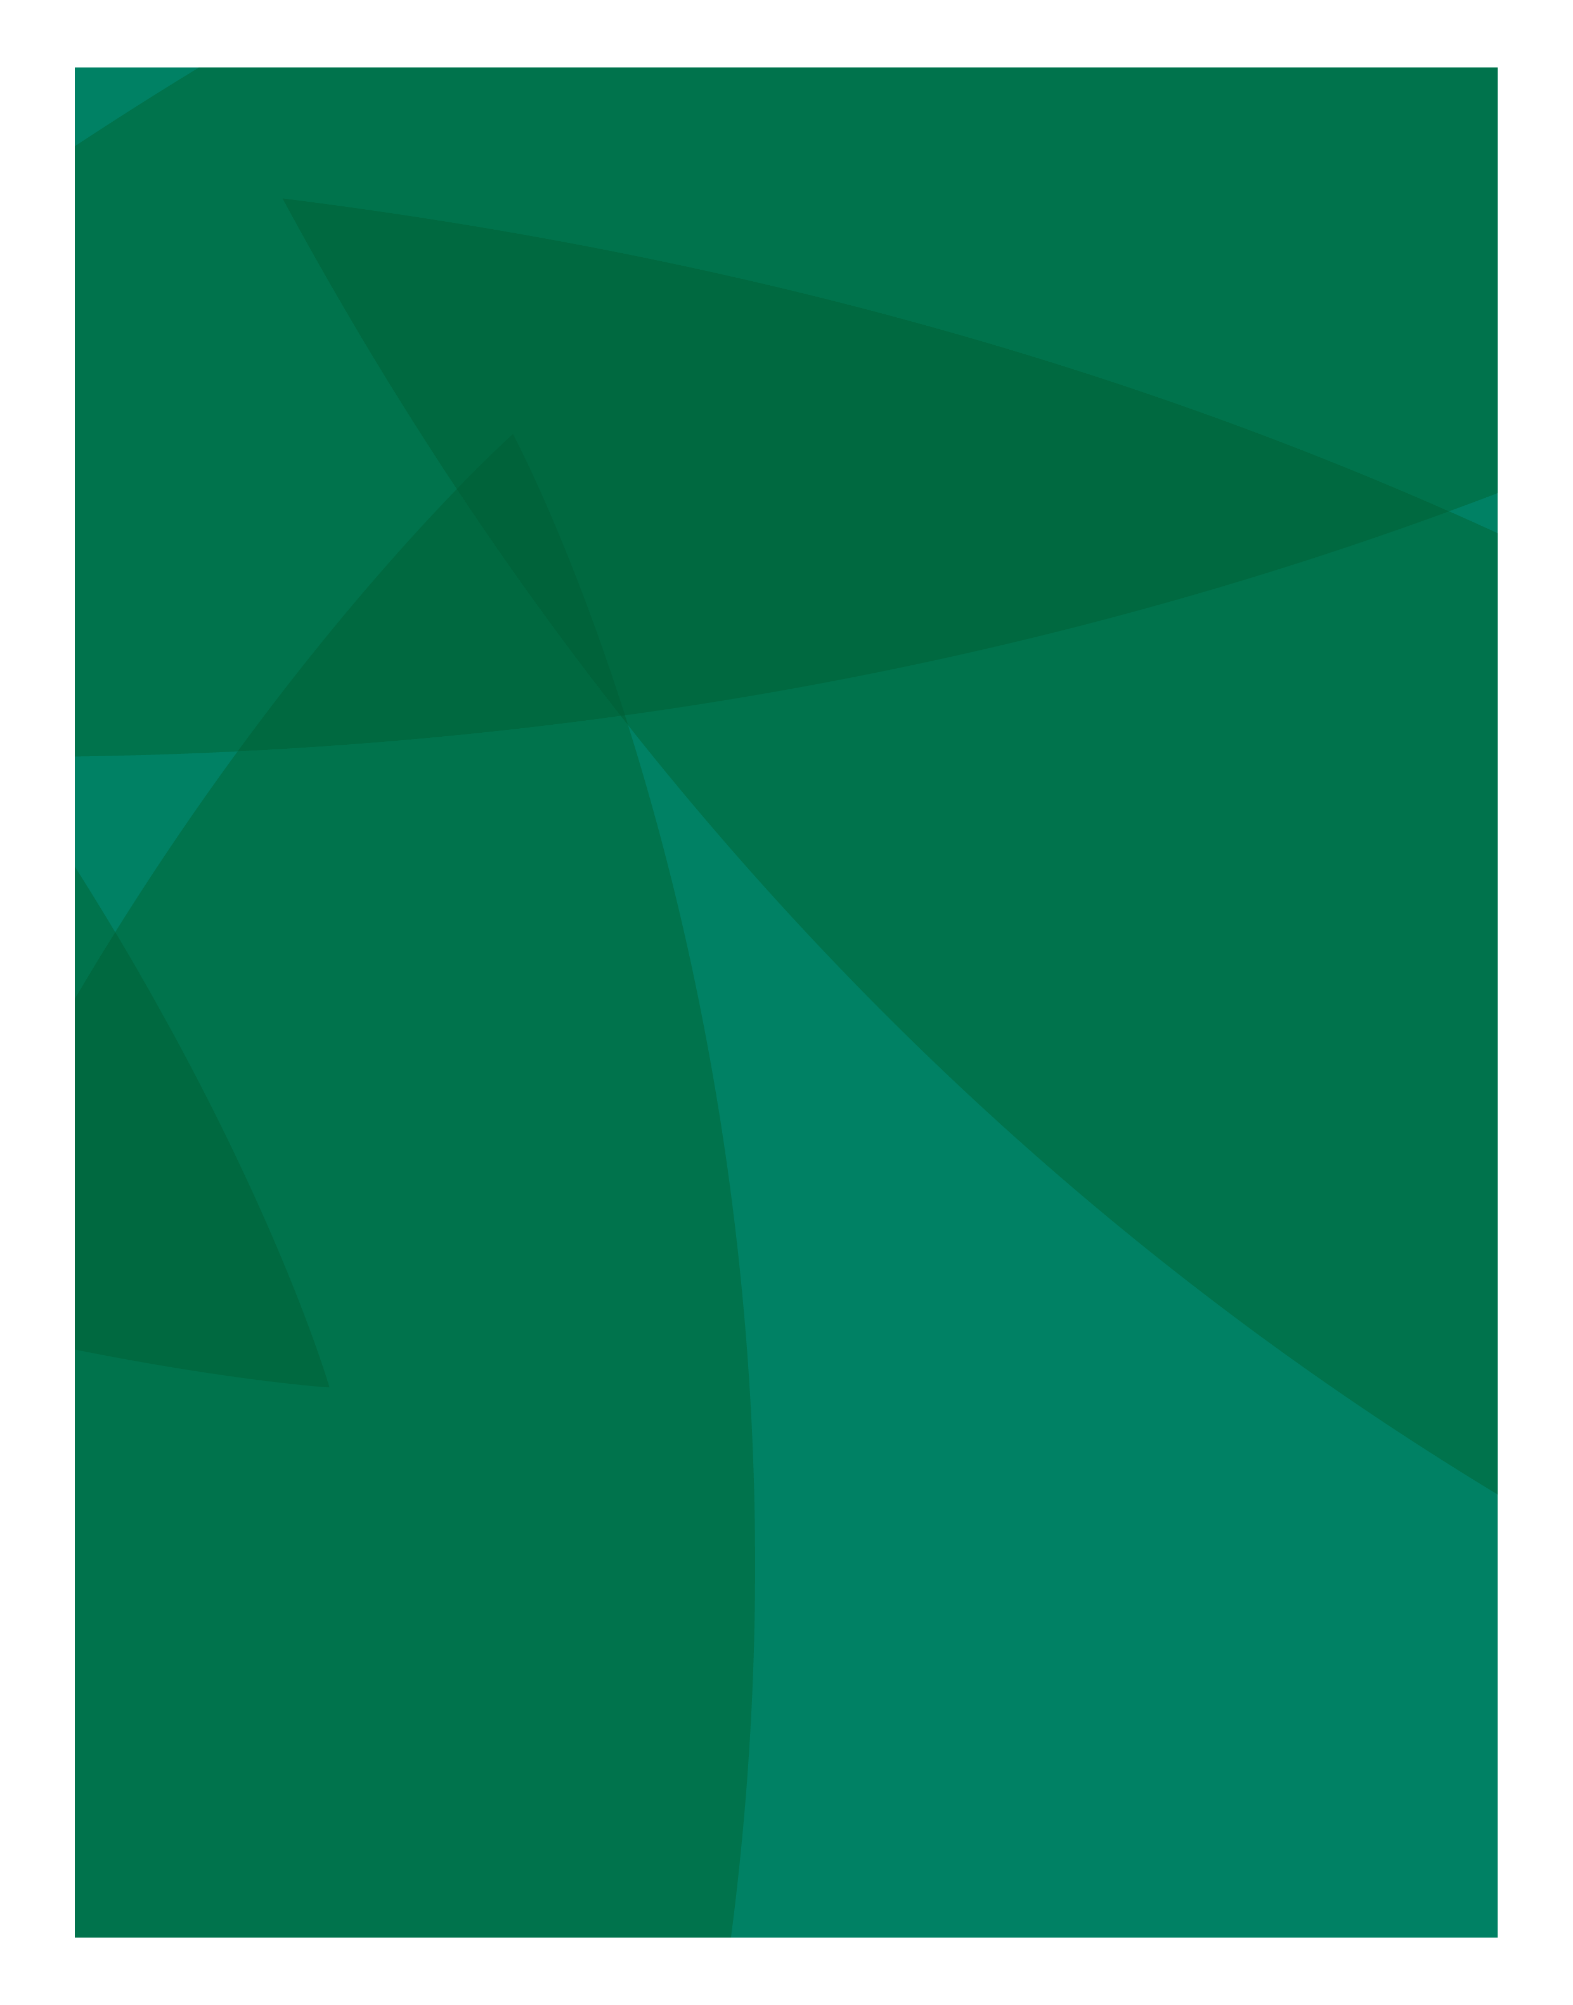 cover page graphic of green leaves